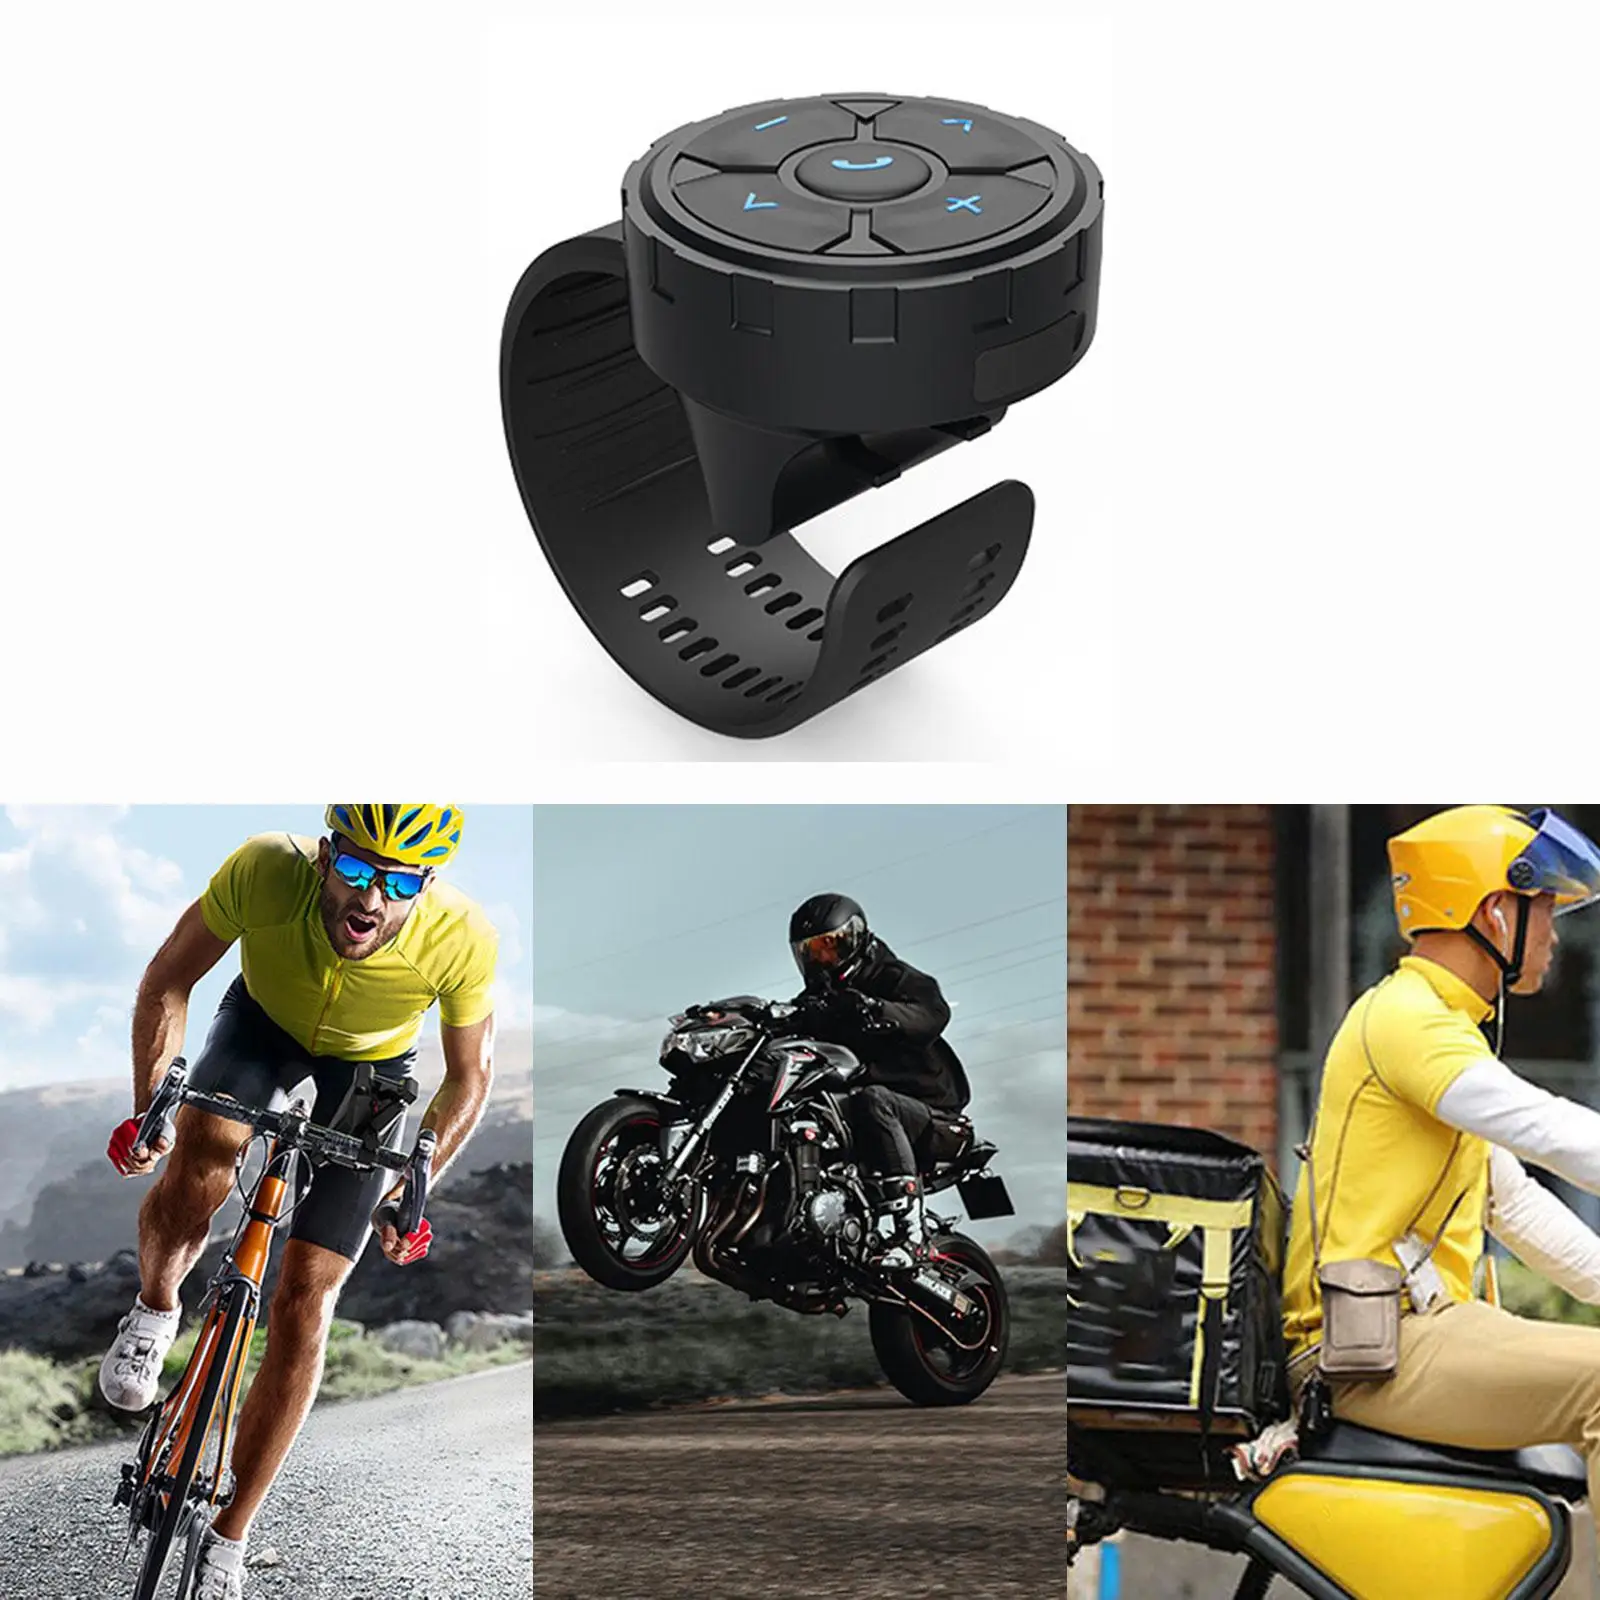 Steering Wheel Remote Control Multipurpose Controller Button Kit for Bike